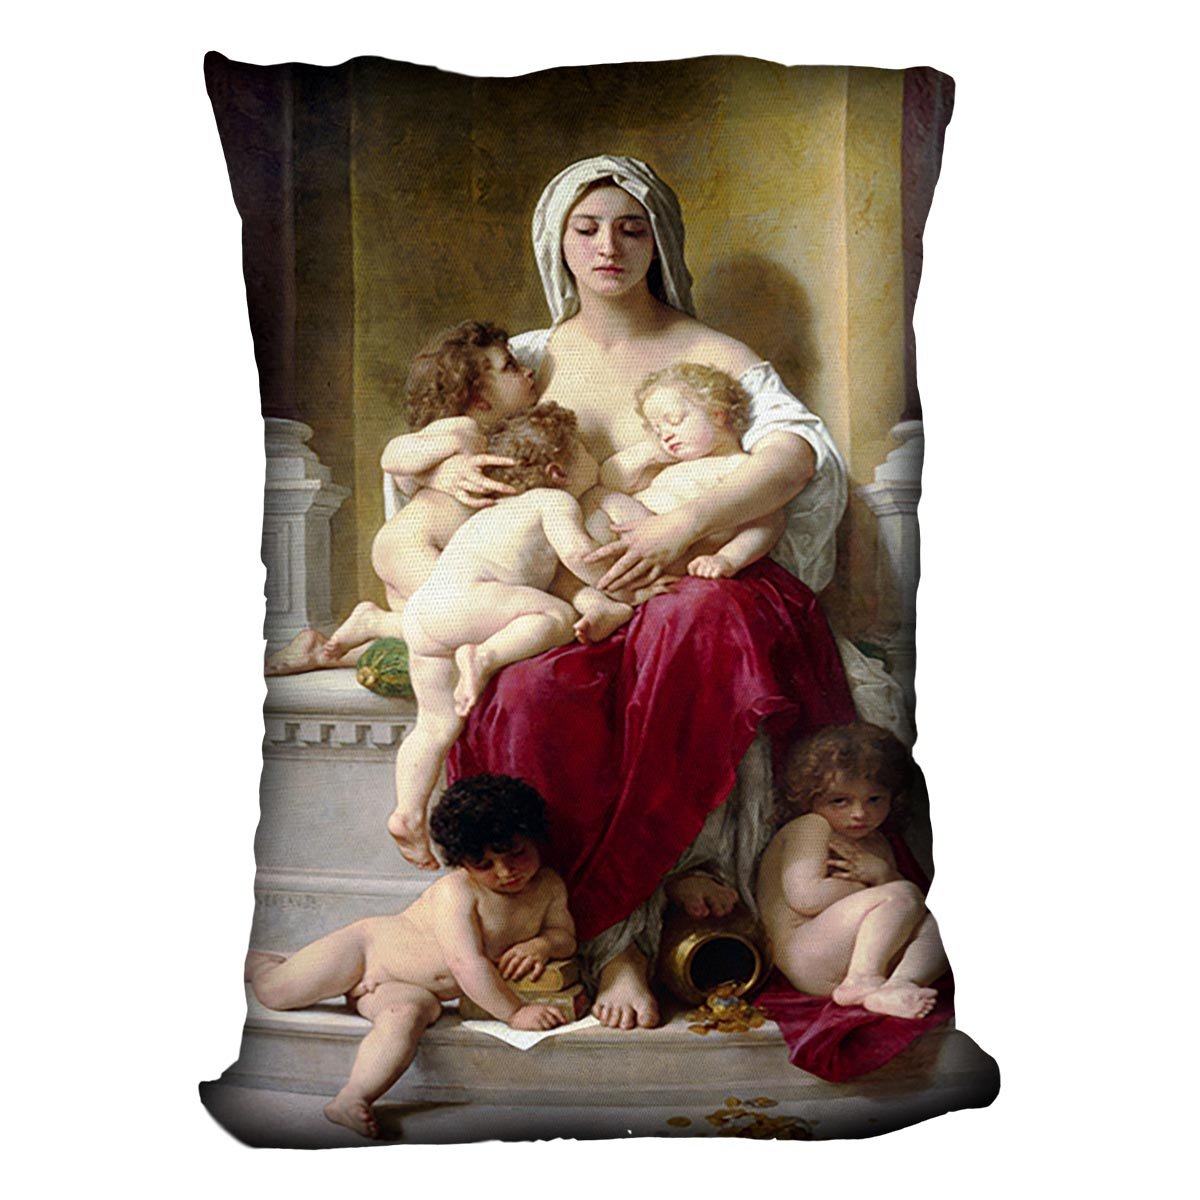 Charity By Bouguereau Throw Pillow